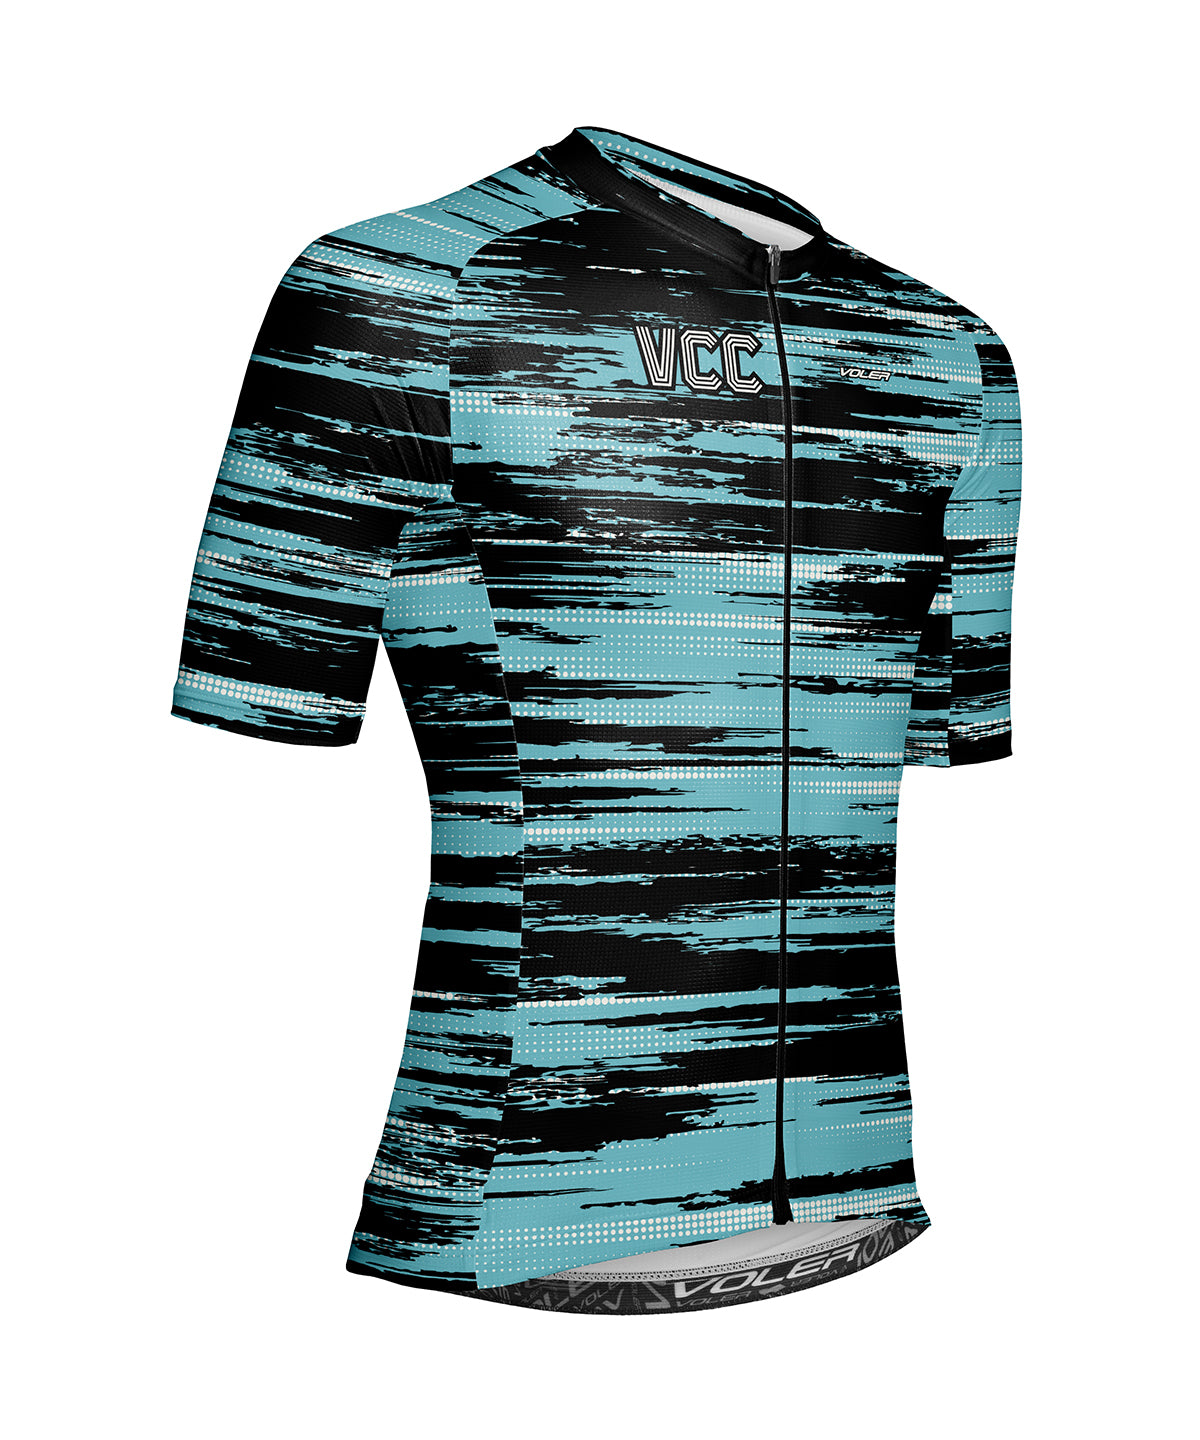 M. VELOCITY AIR JERSEY - VCC MEMBERS ONLY - BOHO